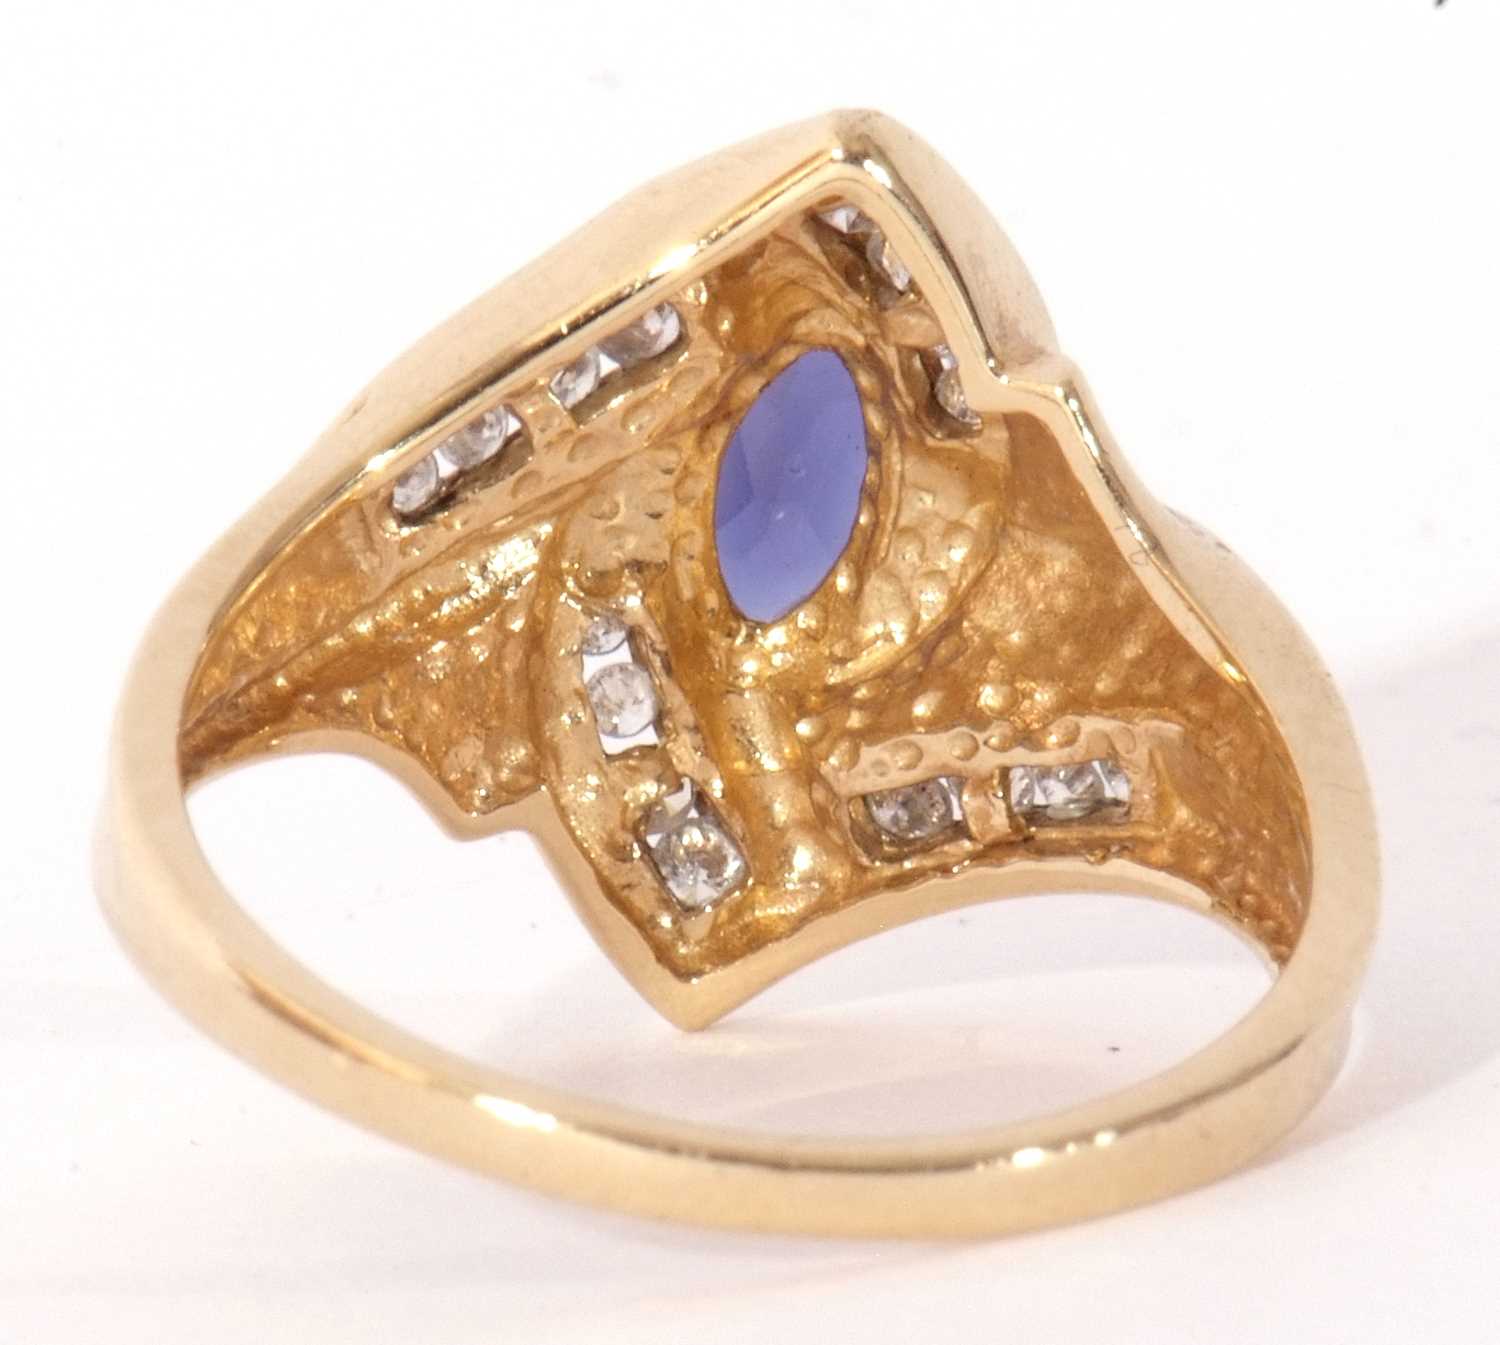 Modern 9K stamped blue and white stone dress ring, size P - Image 6 of 11